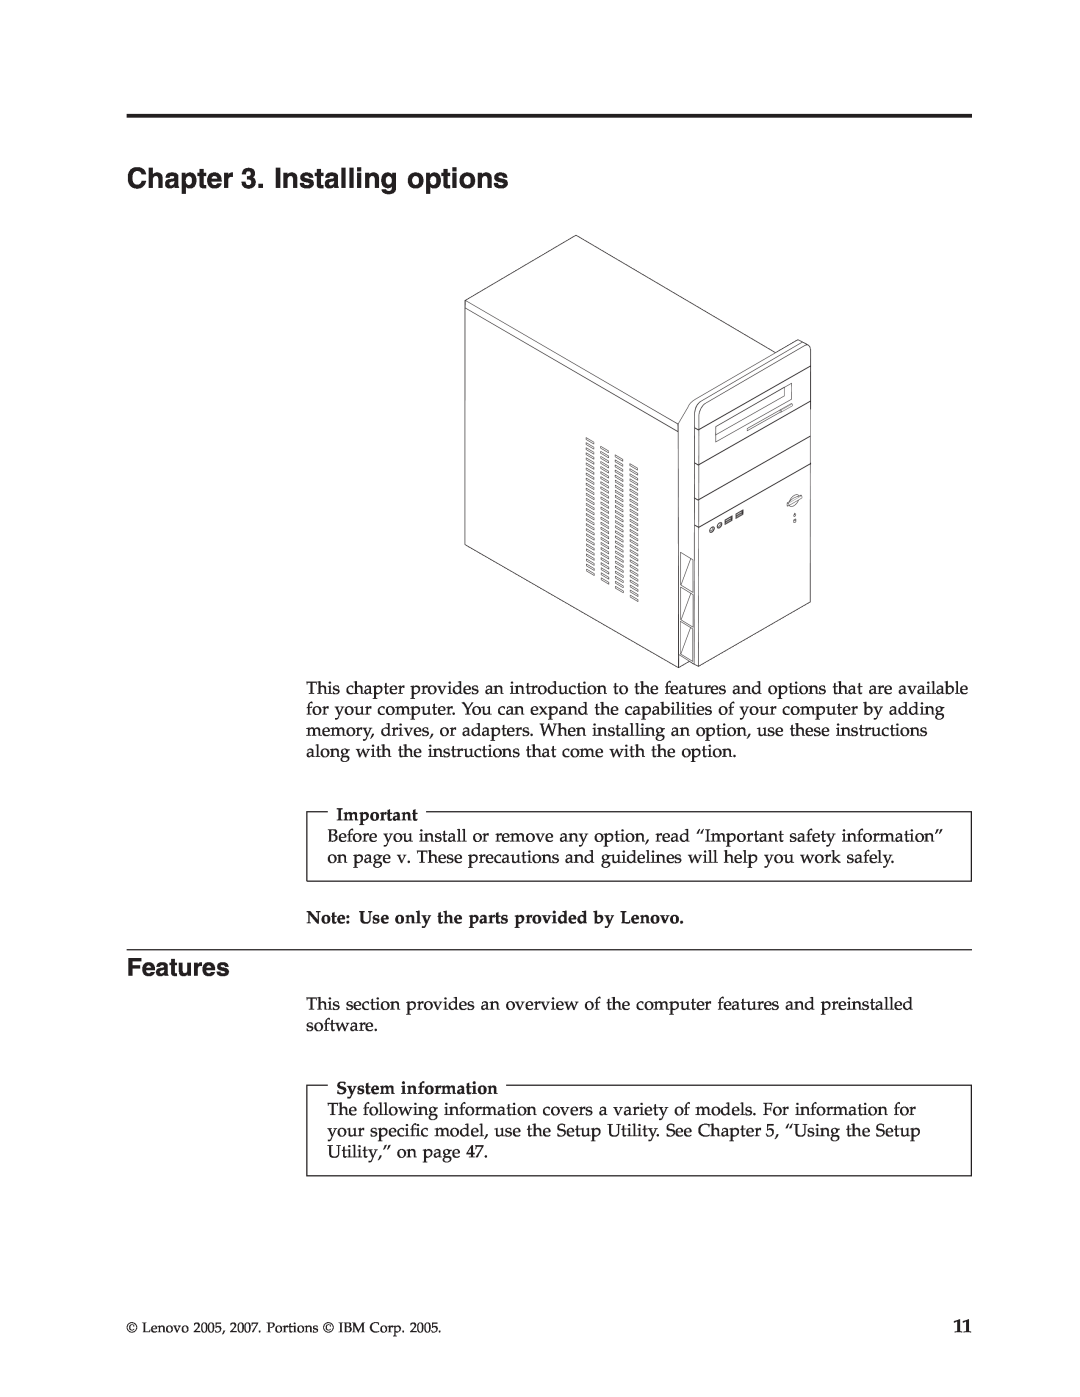 Lenovo 3000 J Series manual Installing options, Features 